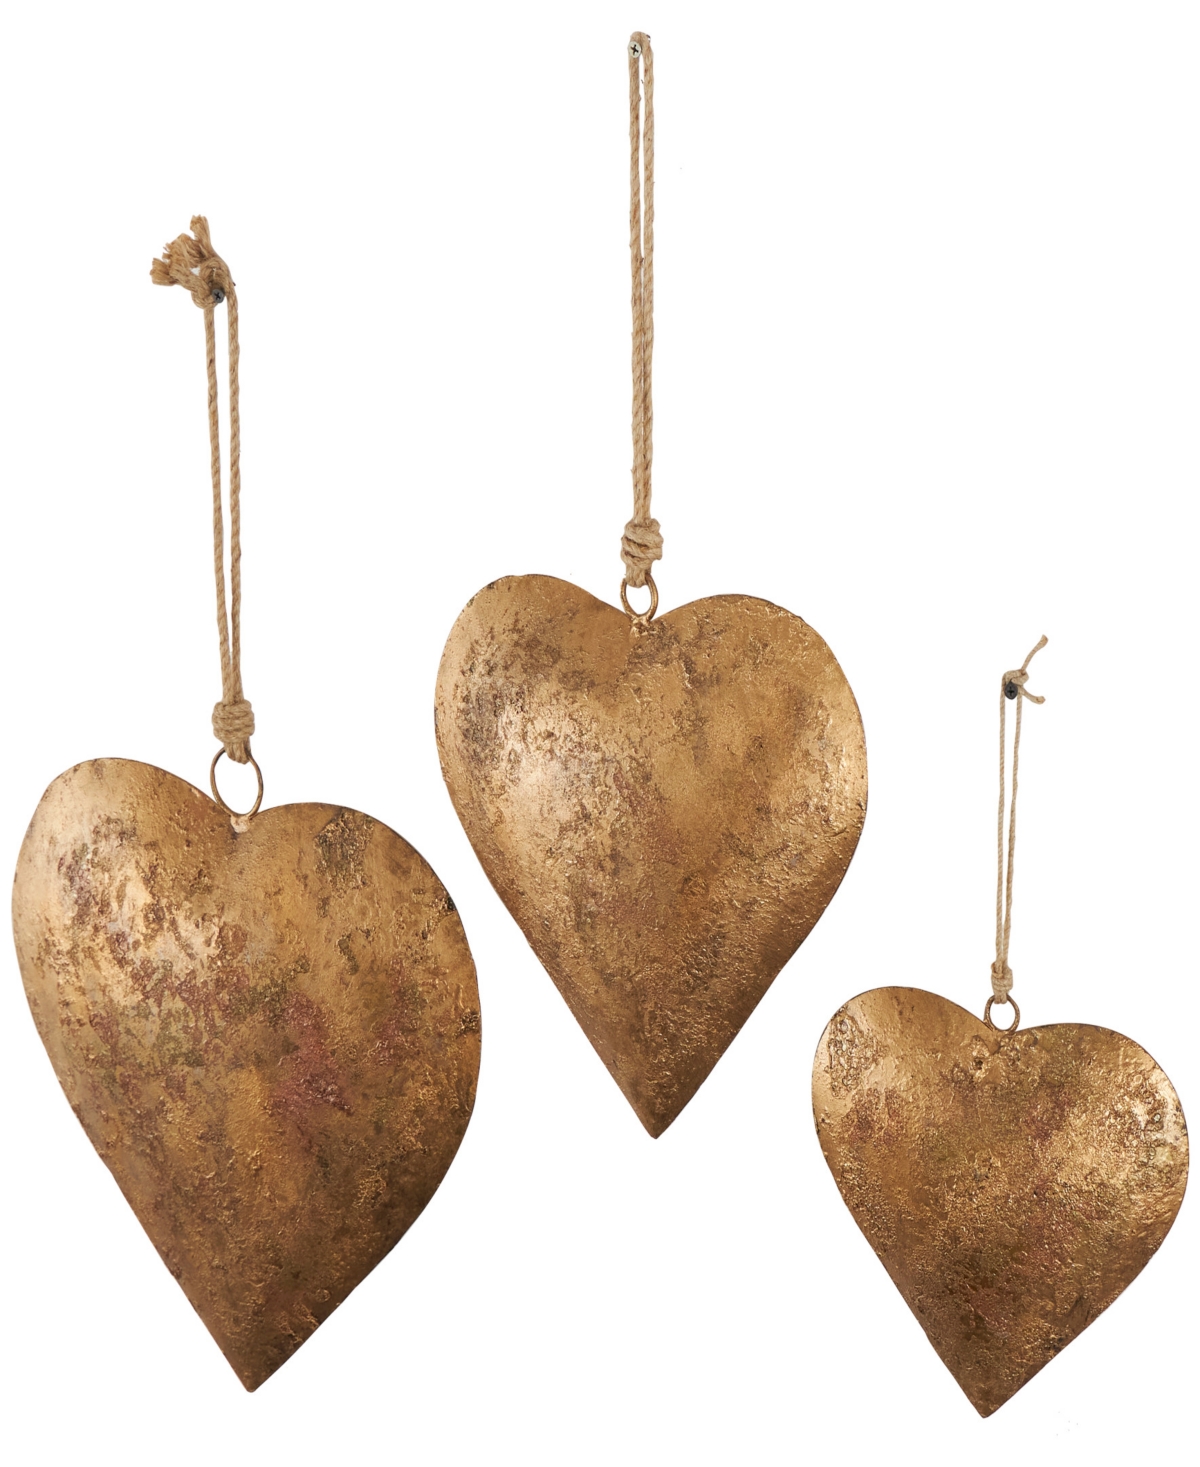 Rosemary Lane Metal Heart Decorative Bells With Hanging Rope Set Of 3, 20", 17", 12" In Gold